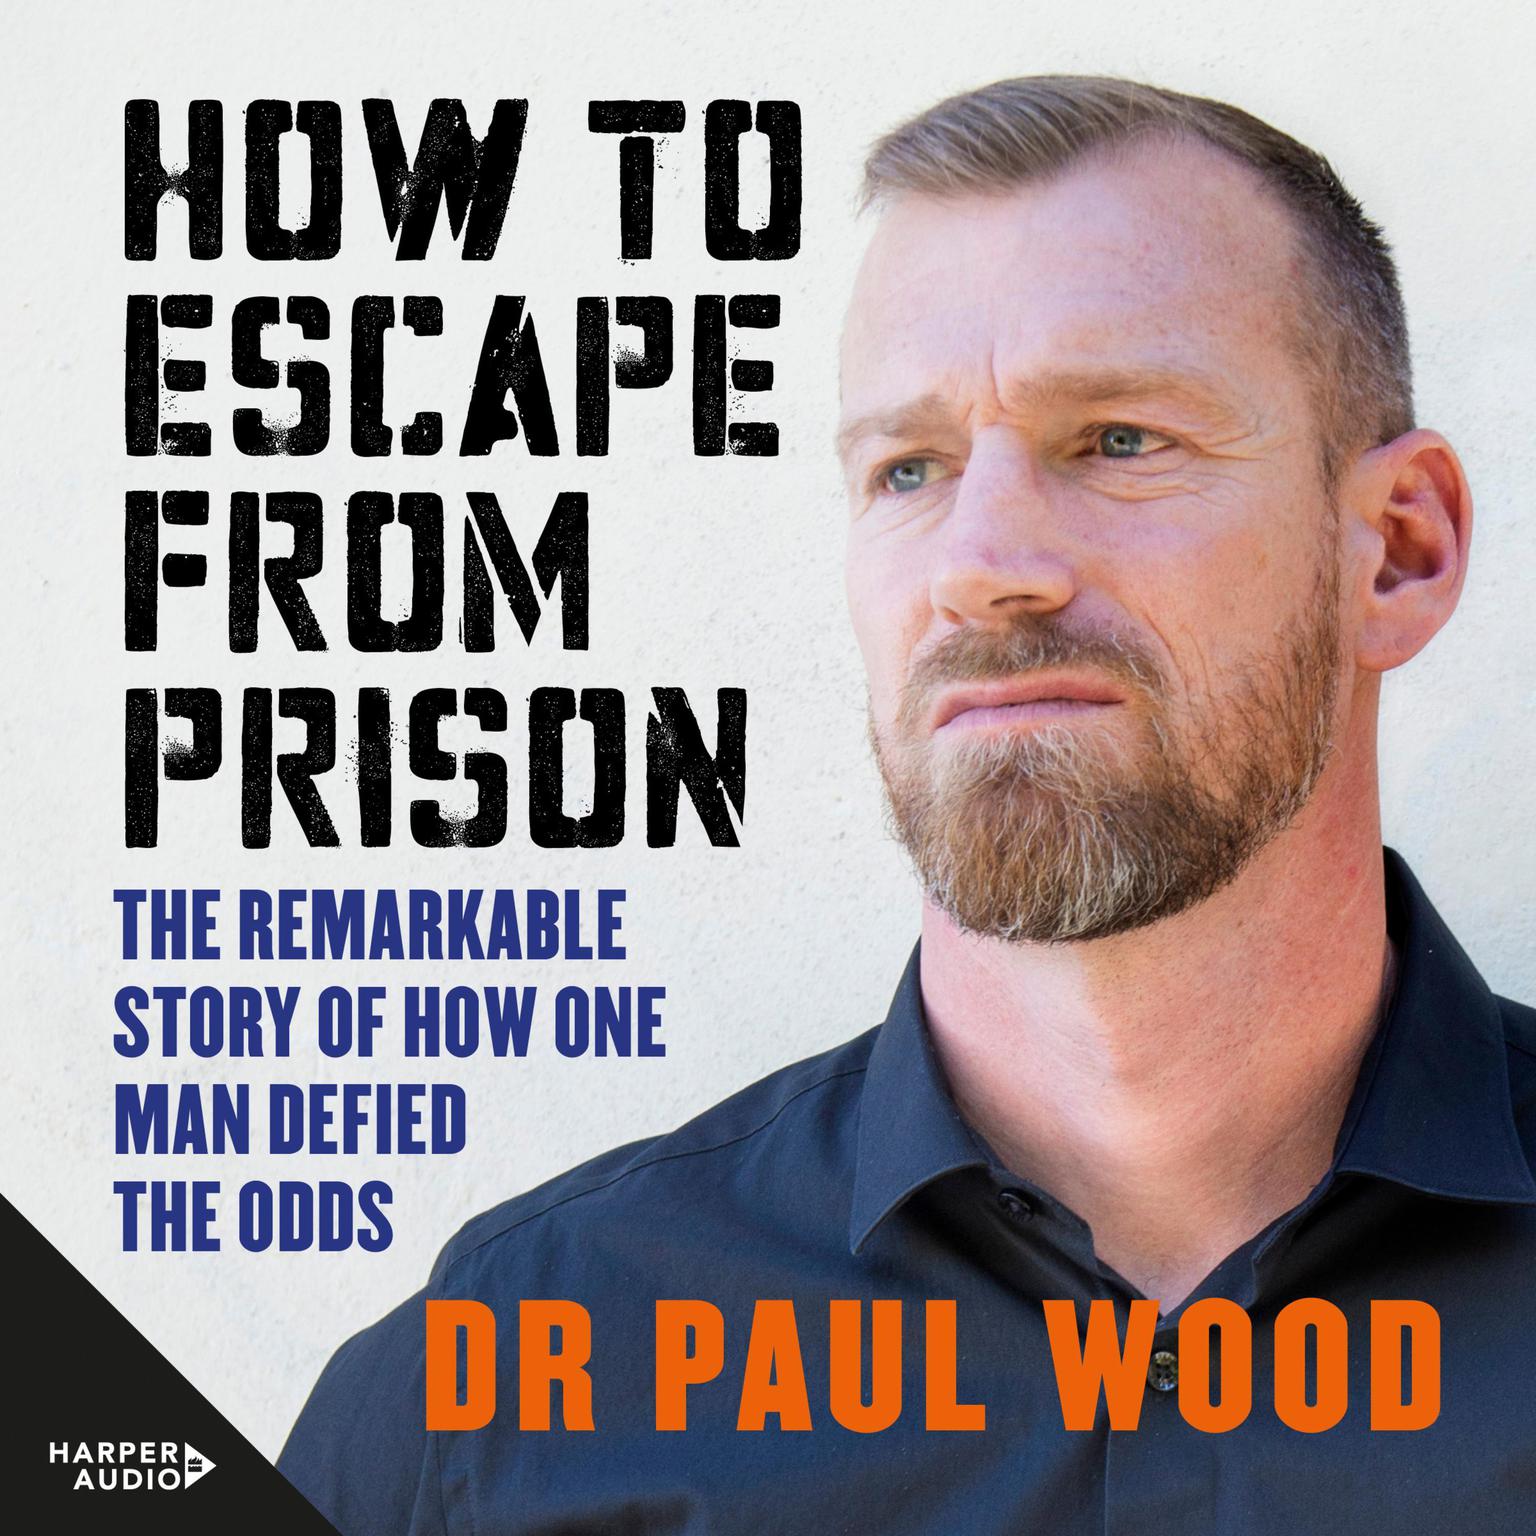 how-to-escape-from-prison-audiobook-by-paul-wood-download-now